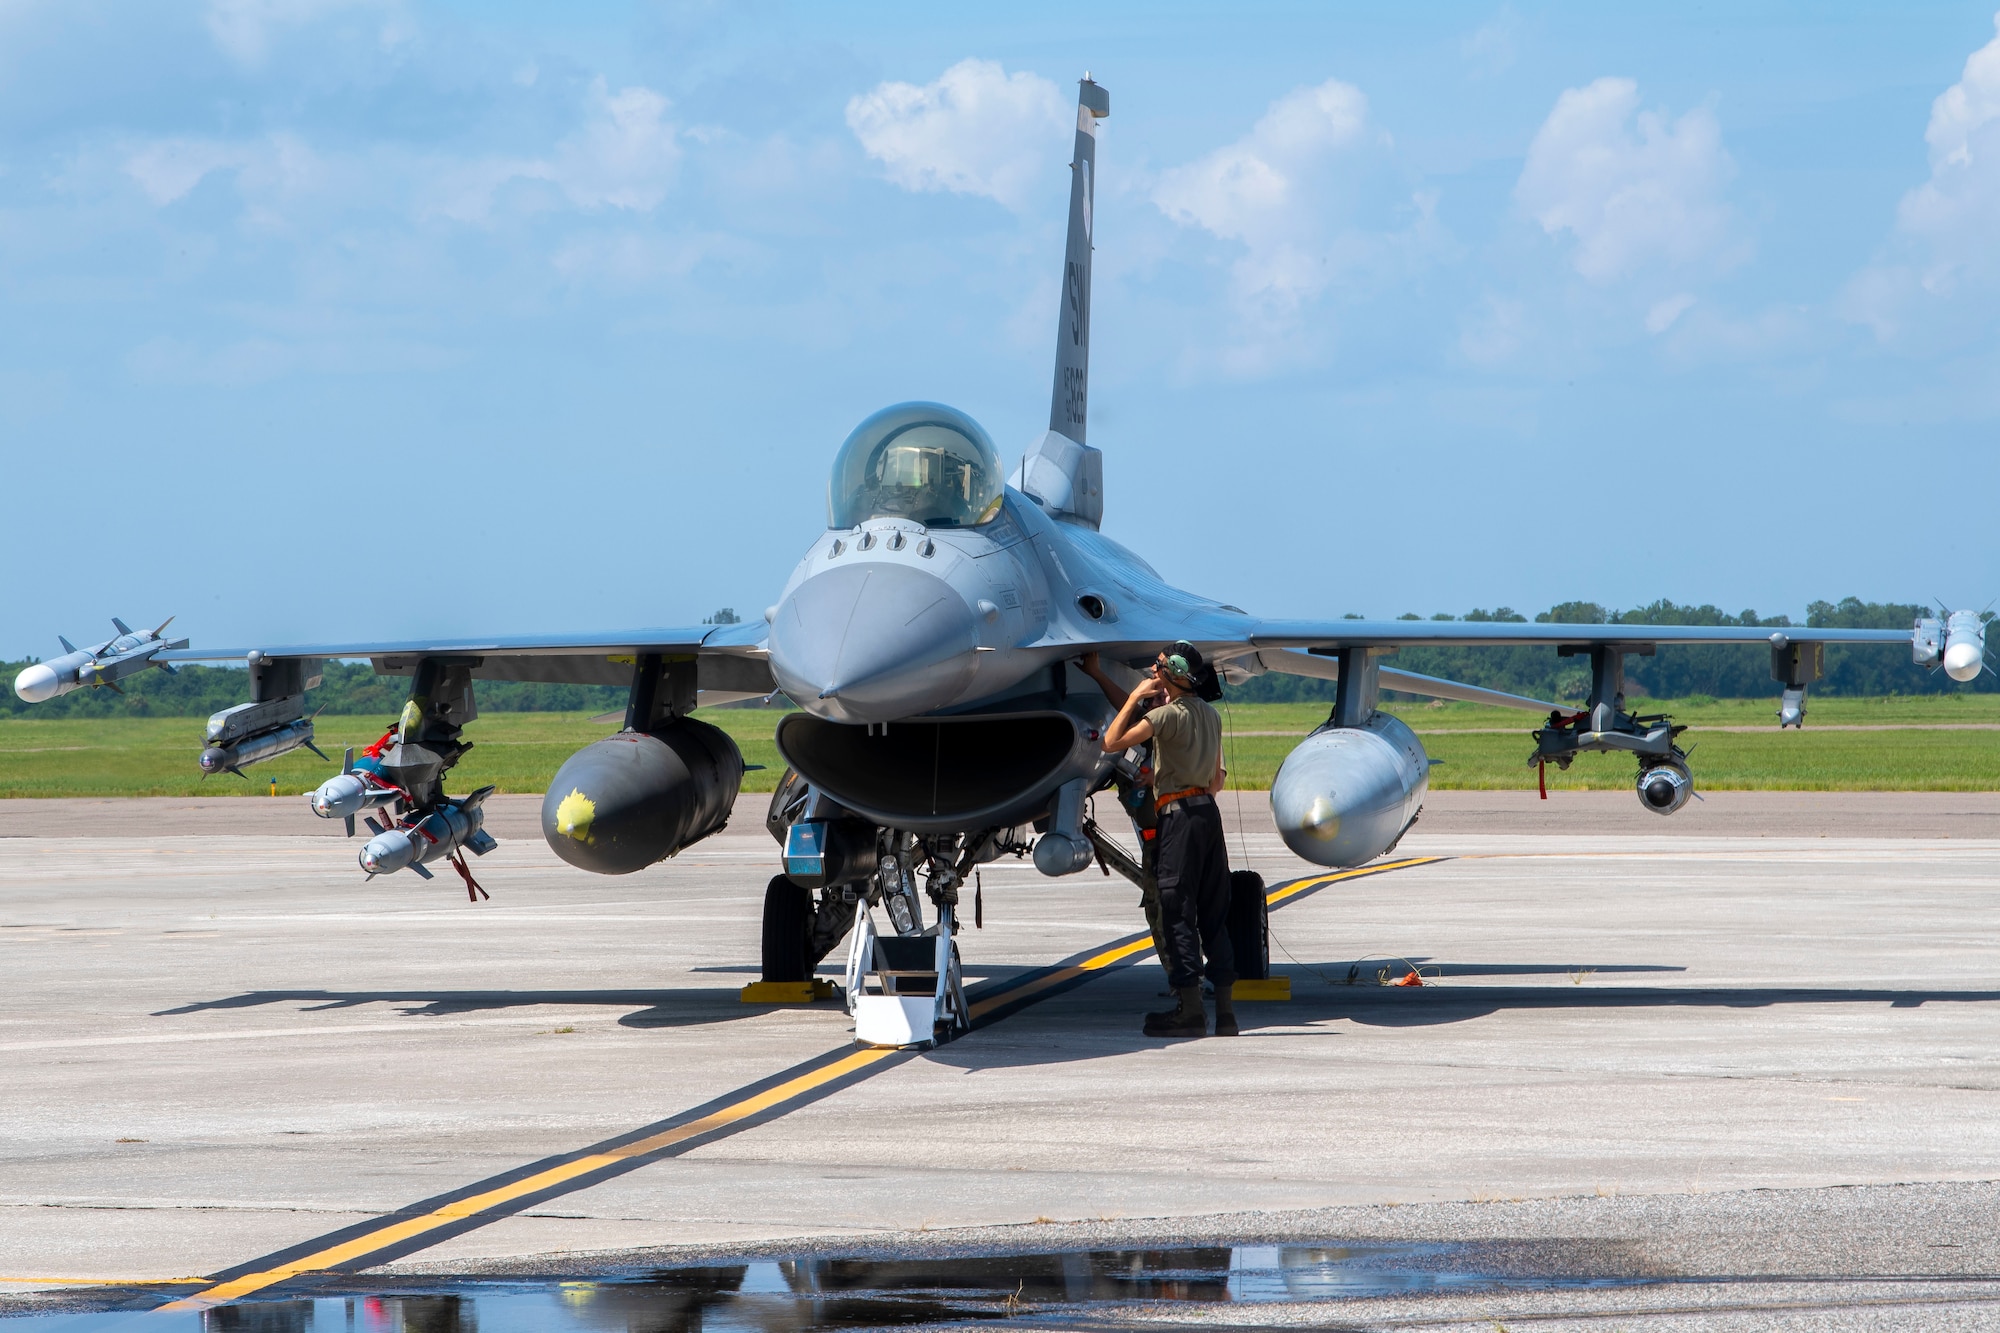 A maintainer with the 79th Fighter Squadron (FS), Shaw Air Force Base, South Carolina, performs a preflight check on an F-16 Fighting Falcon aircraft at MacDill Air Force Base, Florida, Sept. 8, 2021.